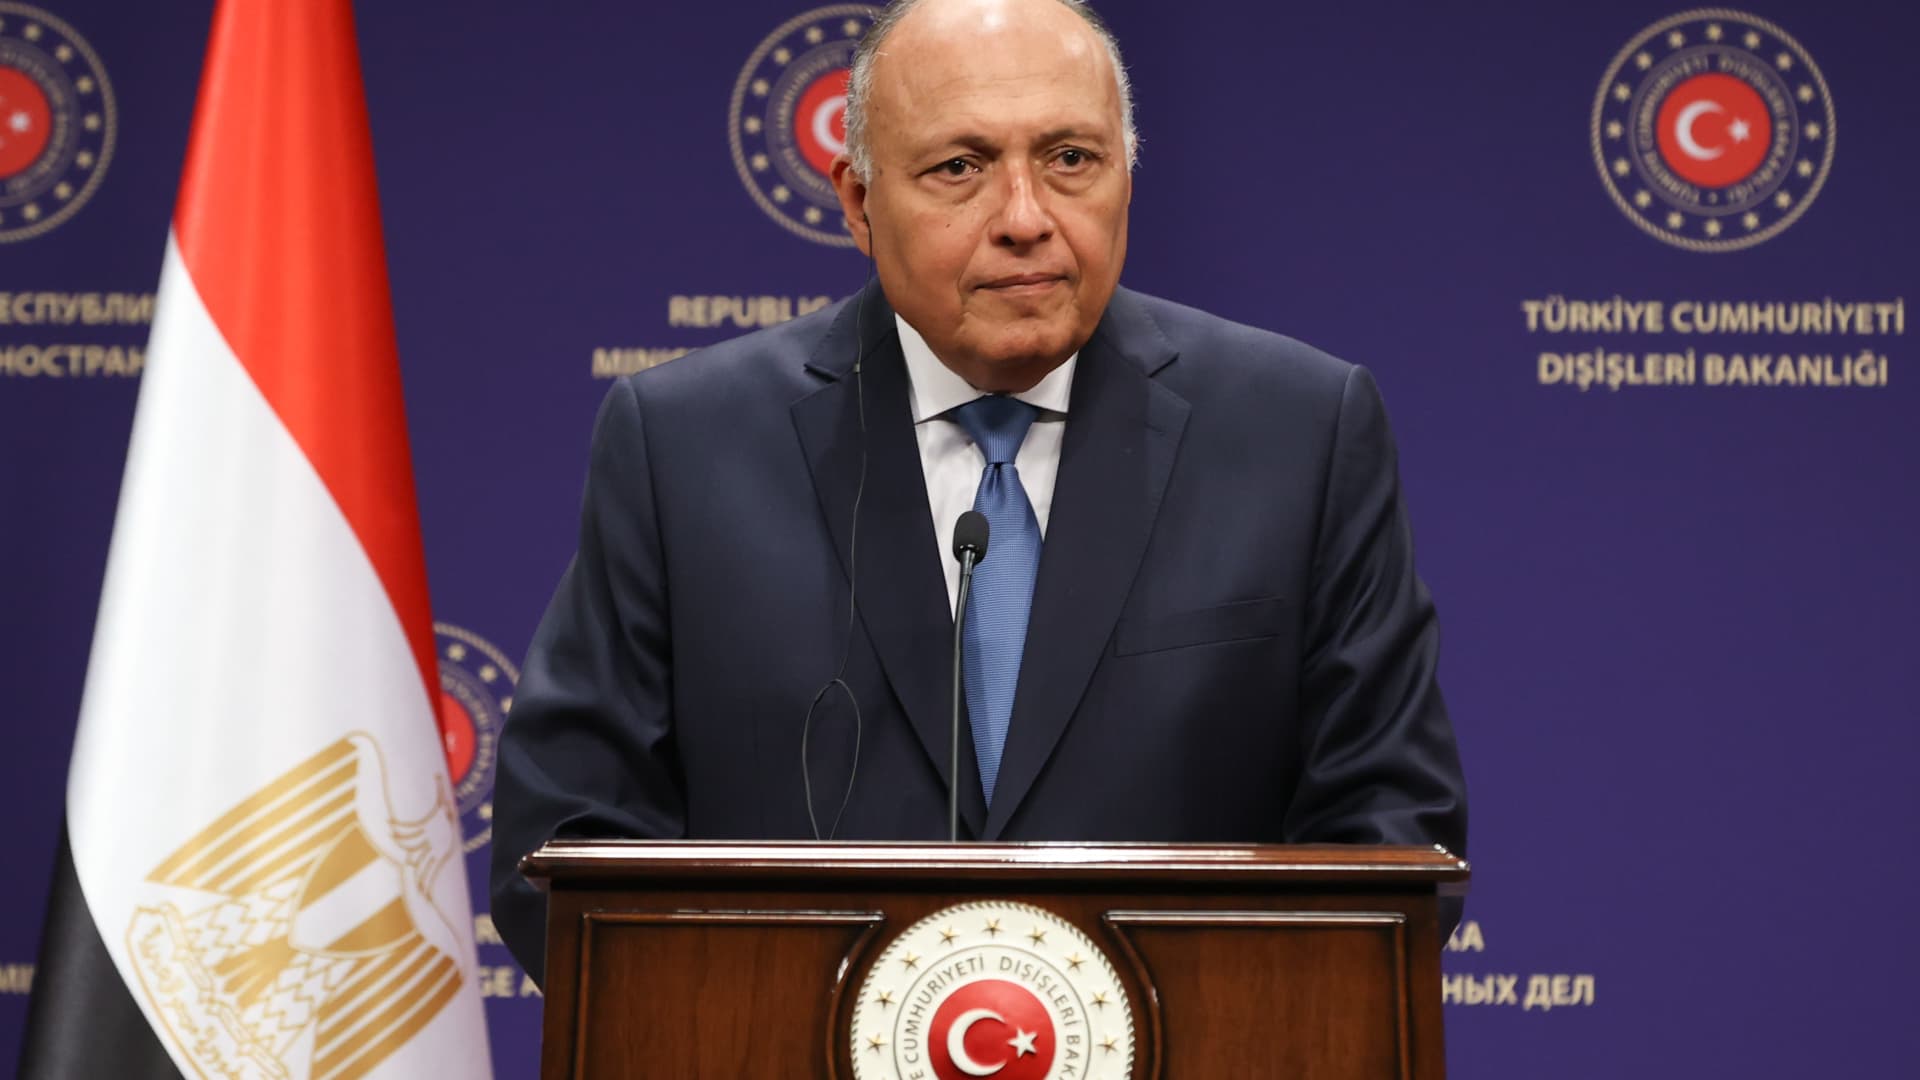 Turkish Foreign Minister Mevlut Cavusoglu and his Egyptian counterpart Sameh Shoukry at a joint news conference in Turkiye's capital Ankara in April.